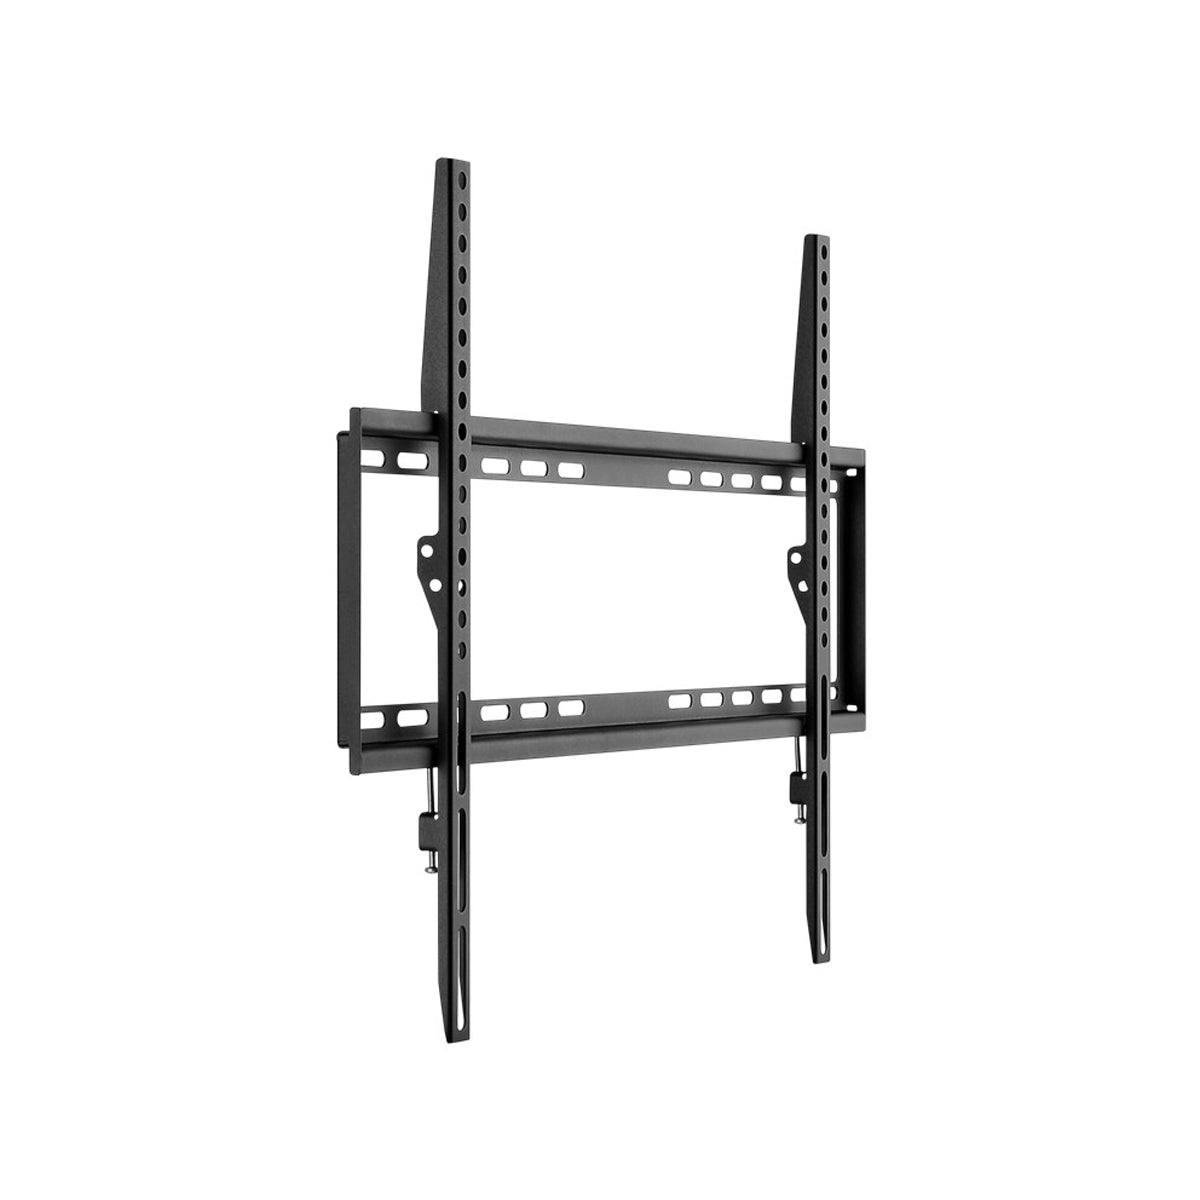 Goobay TV Wall Mount Fixed Position for Large TVs (37-70